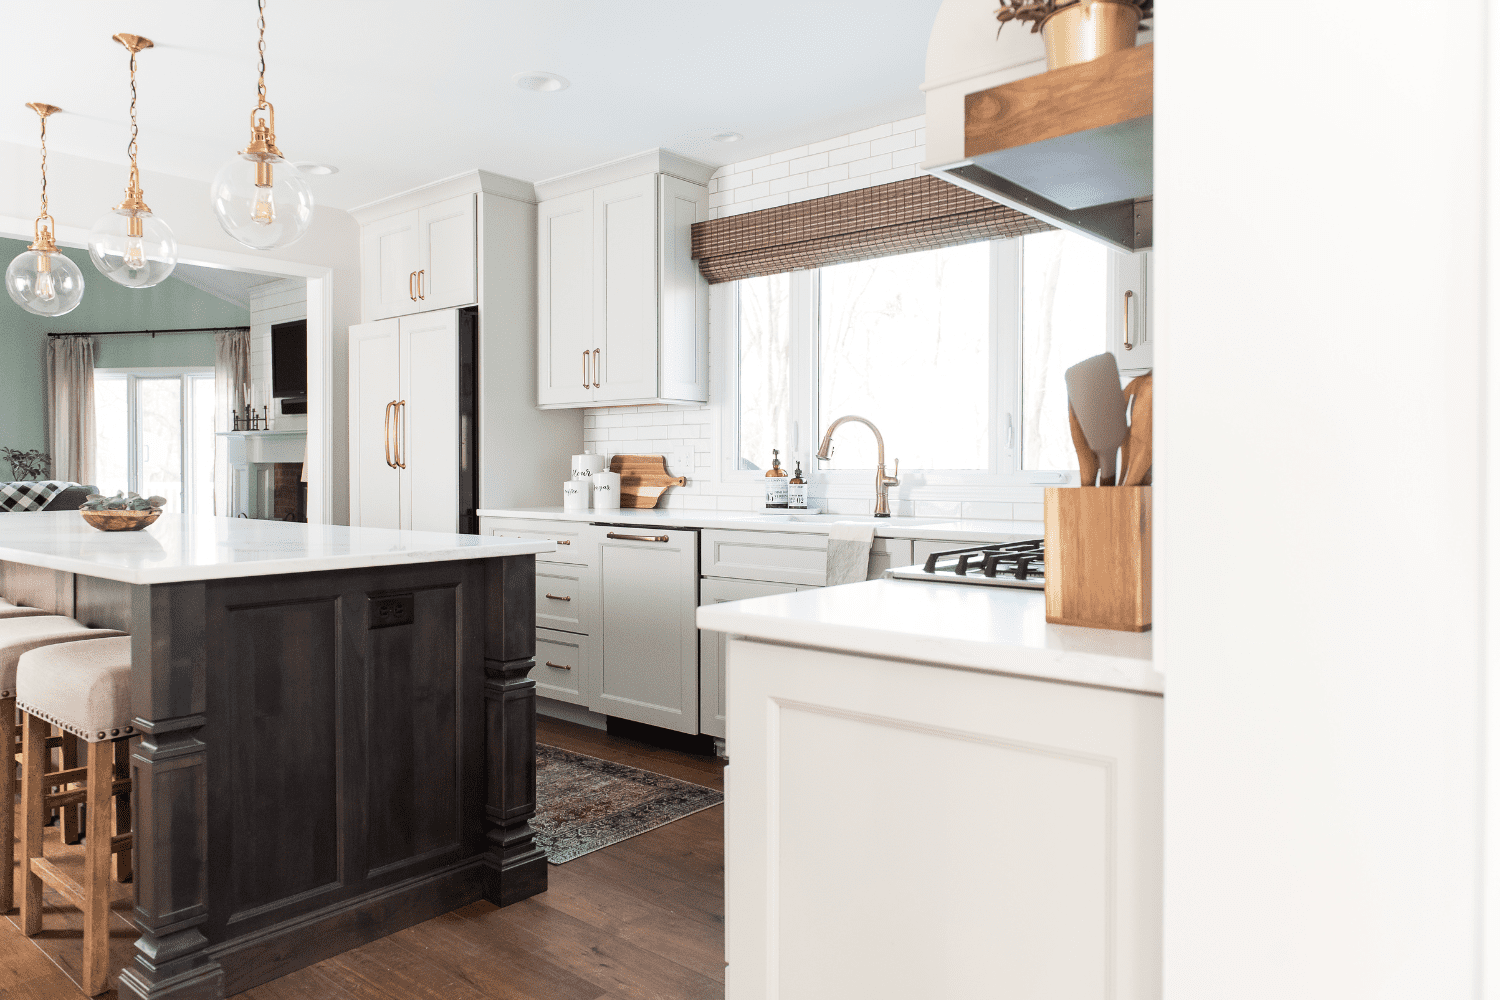 Nicholas Design Build | Neutral kitchen with wood floors and a center island.